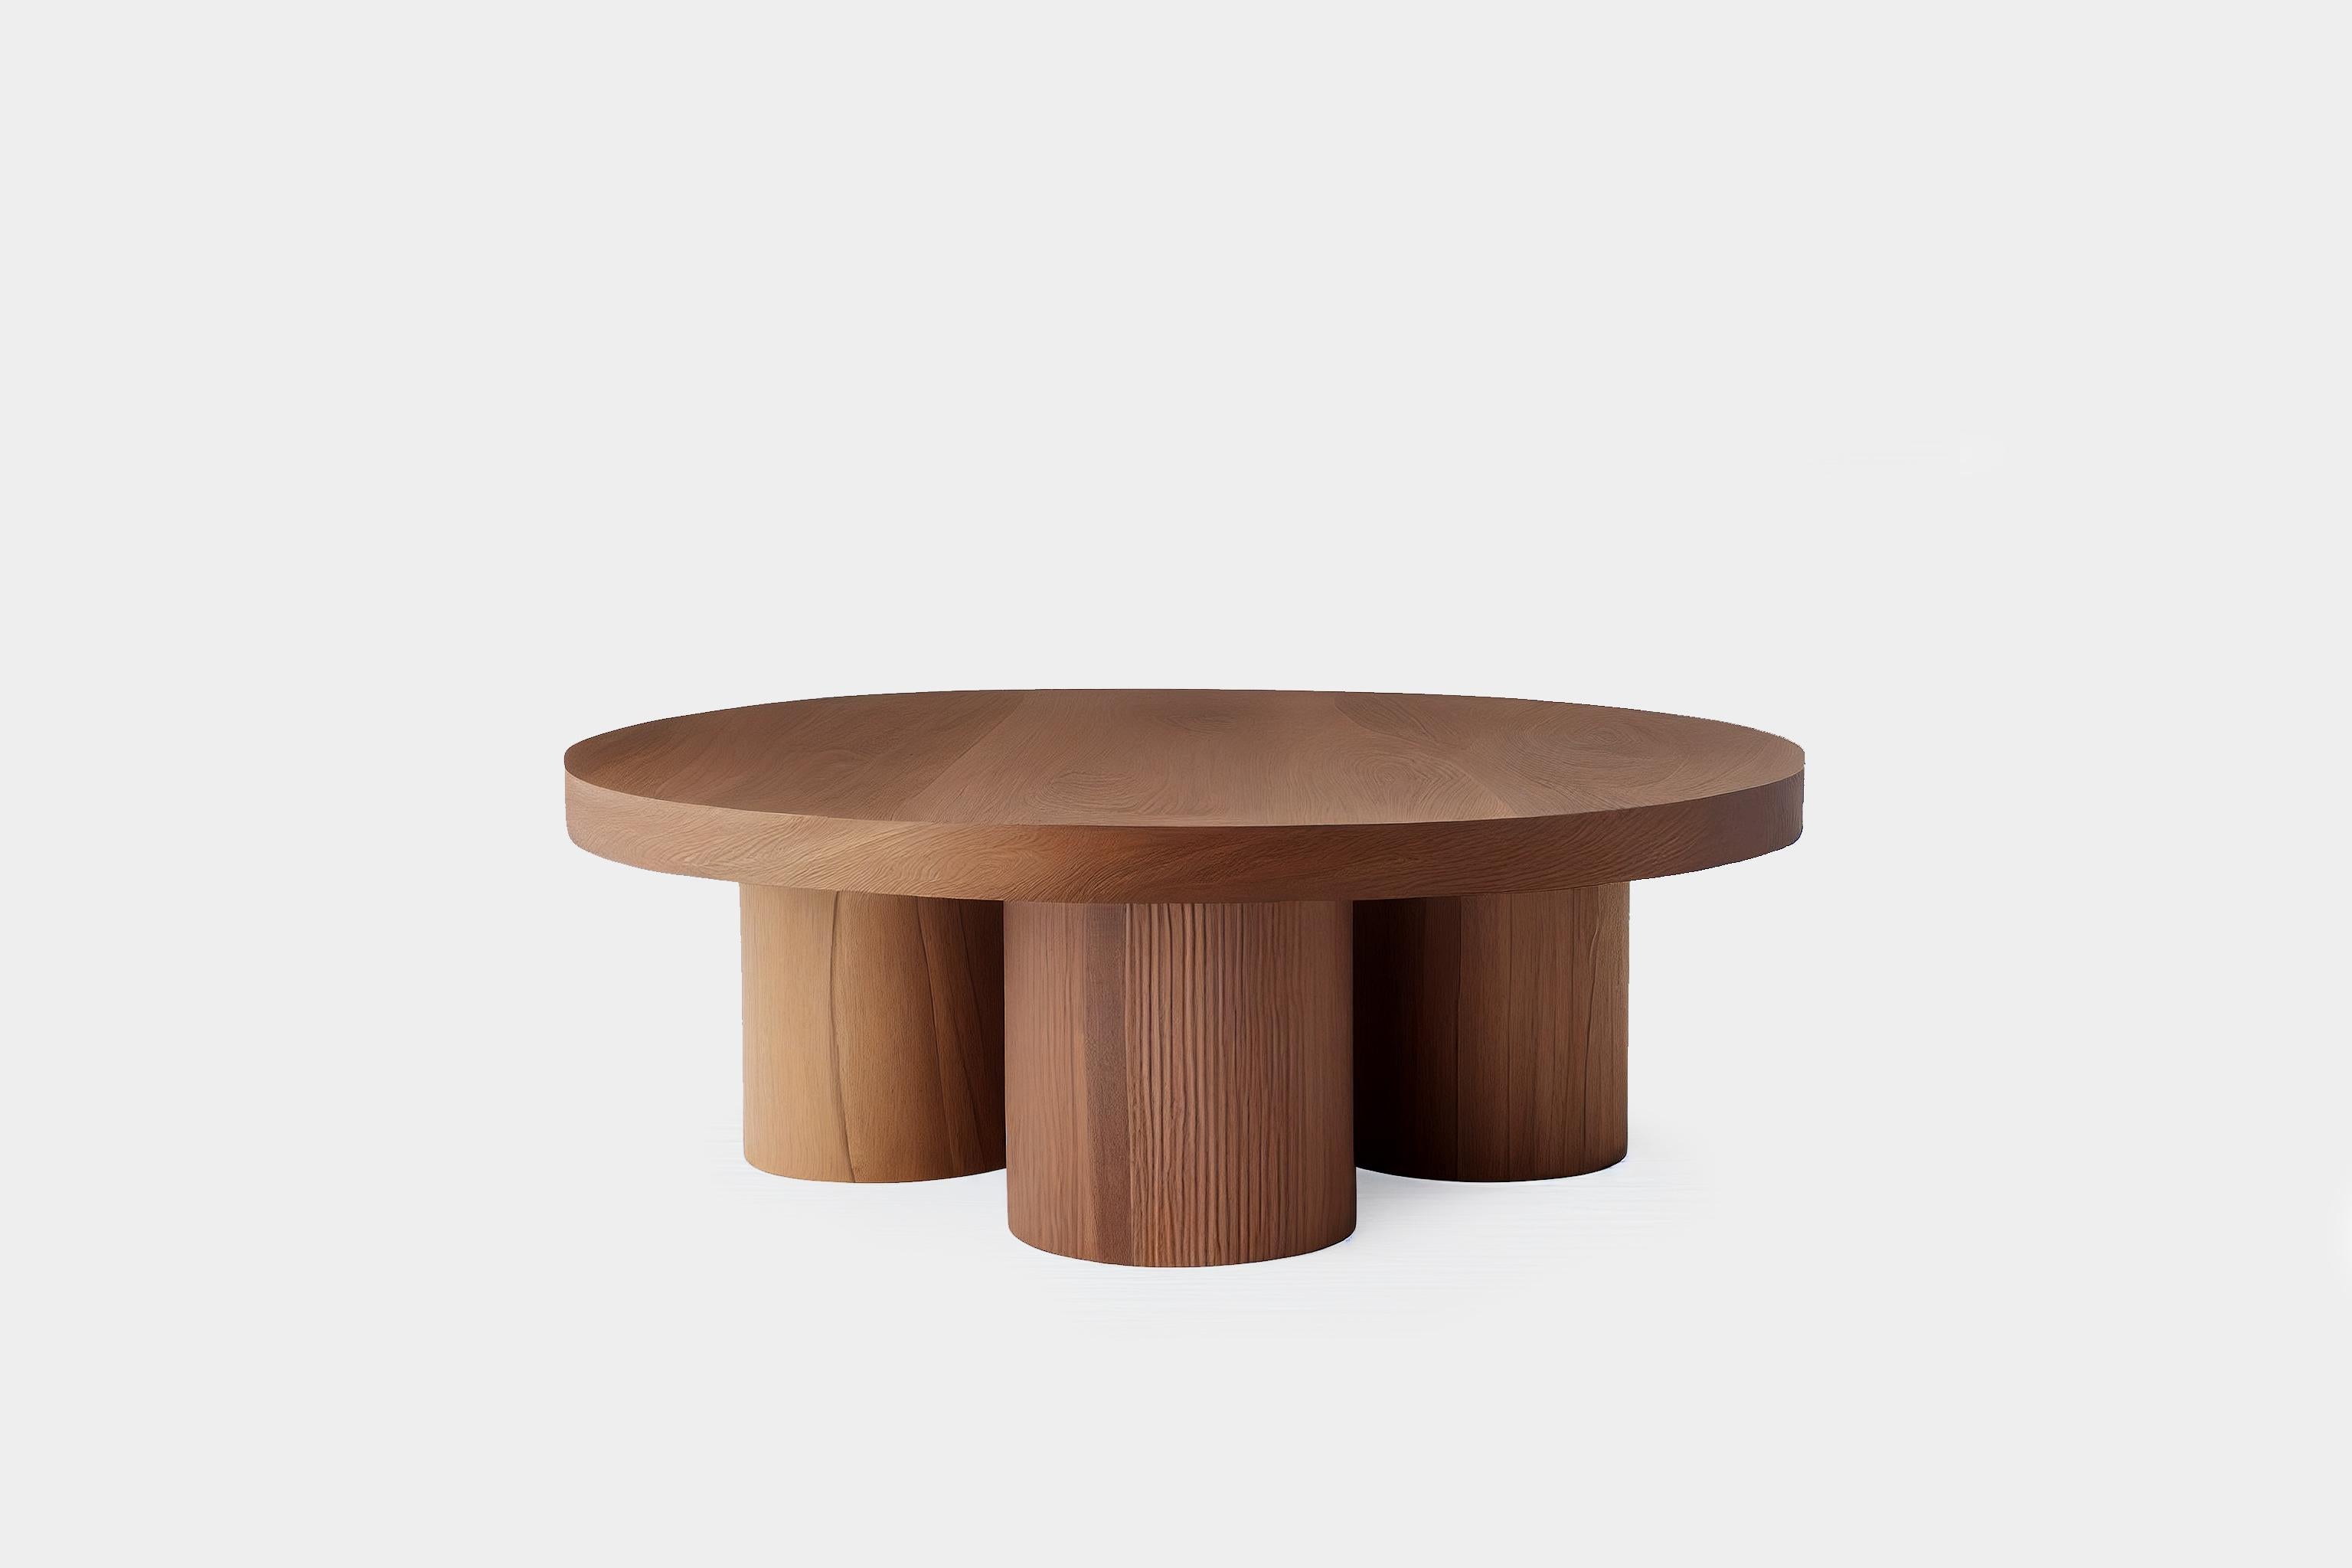 Brutalist Round Coffee Table in Red Oak Wood Veneer, Podio by NONO For Sale 2